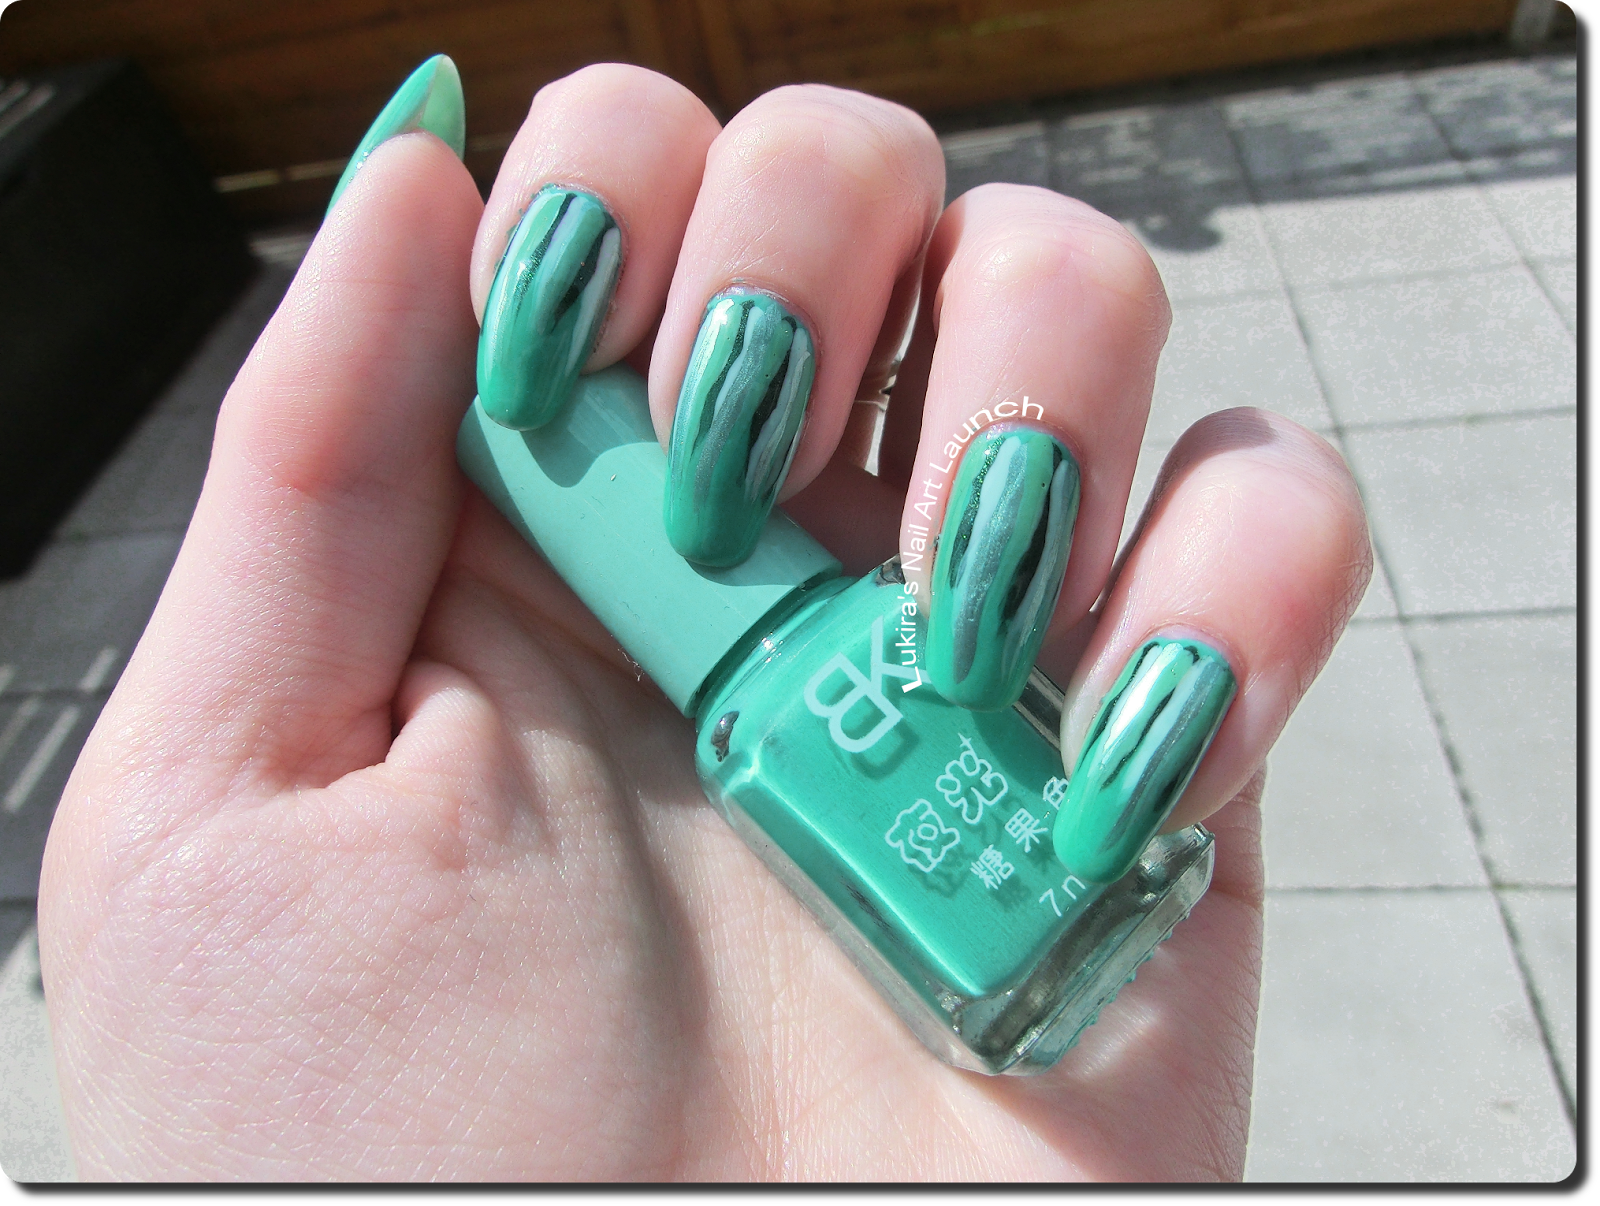 3. "Glow in the Dark" Nail Color - wide 7